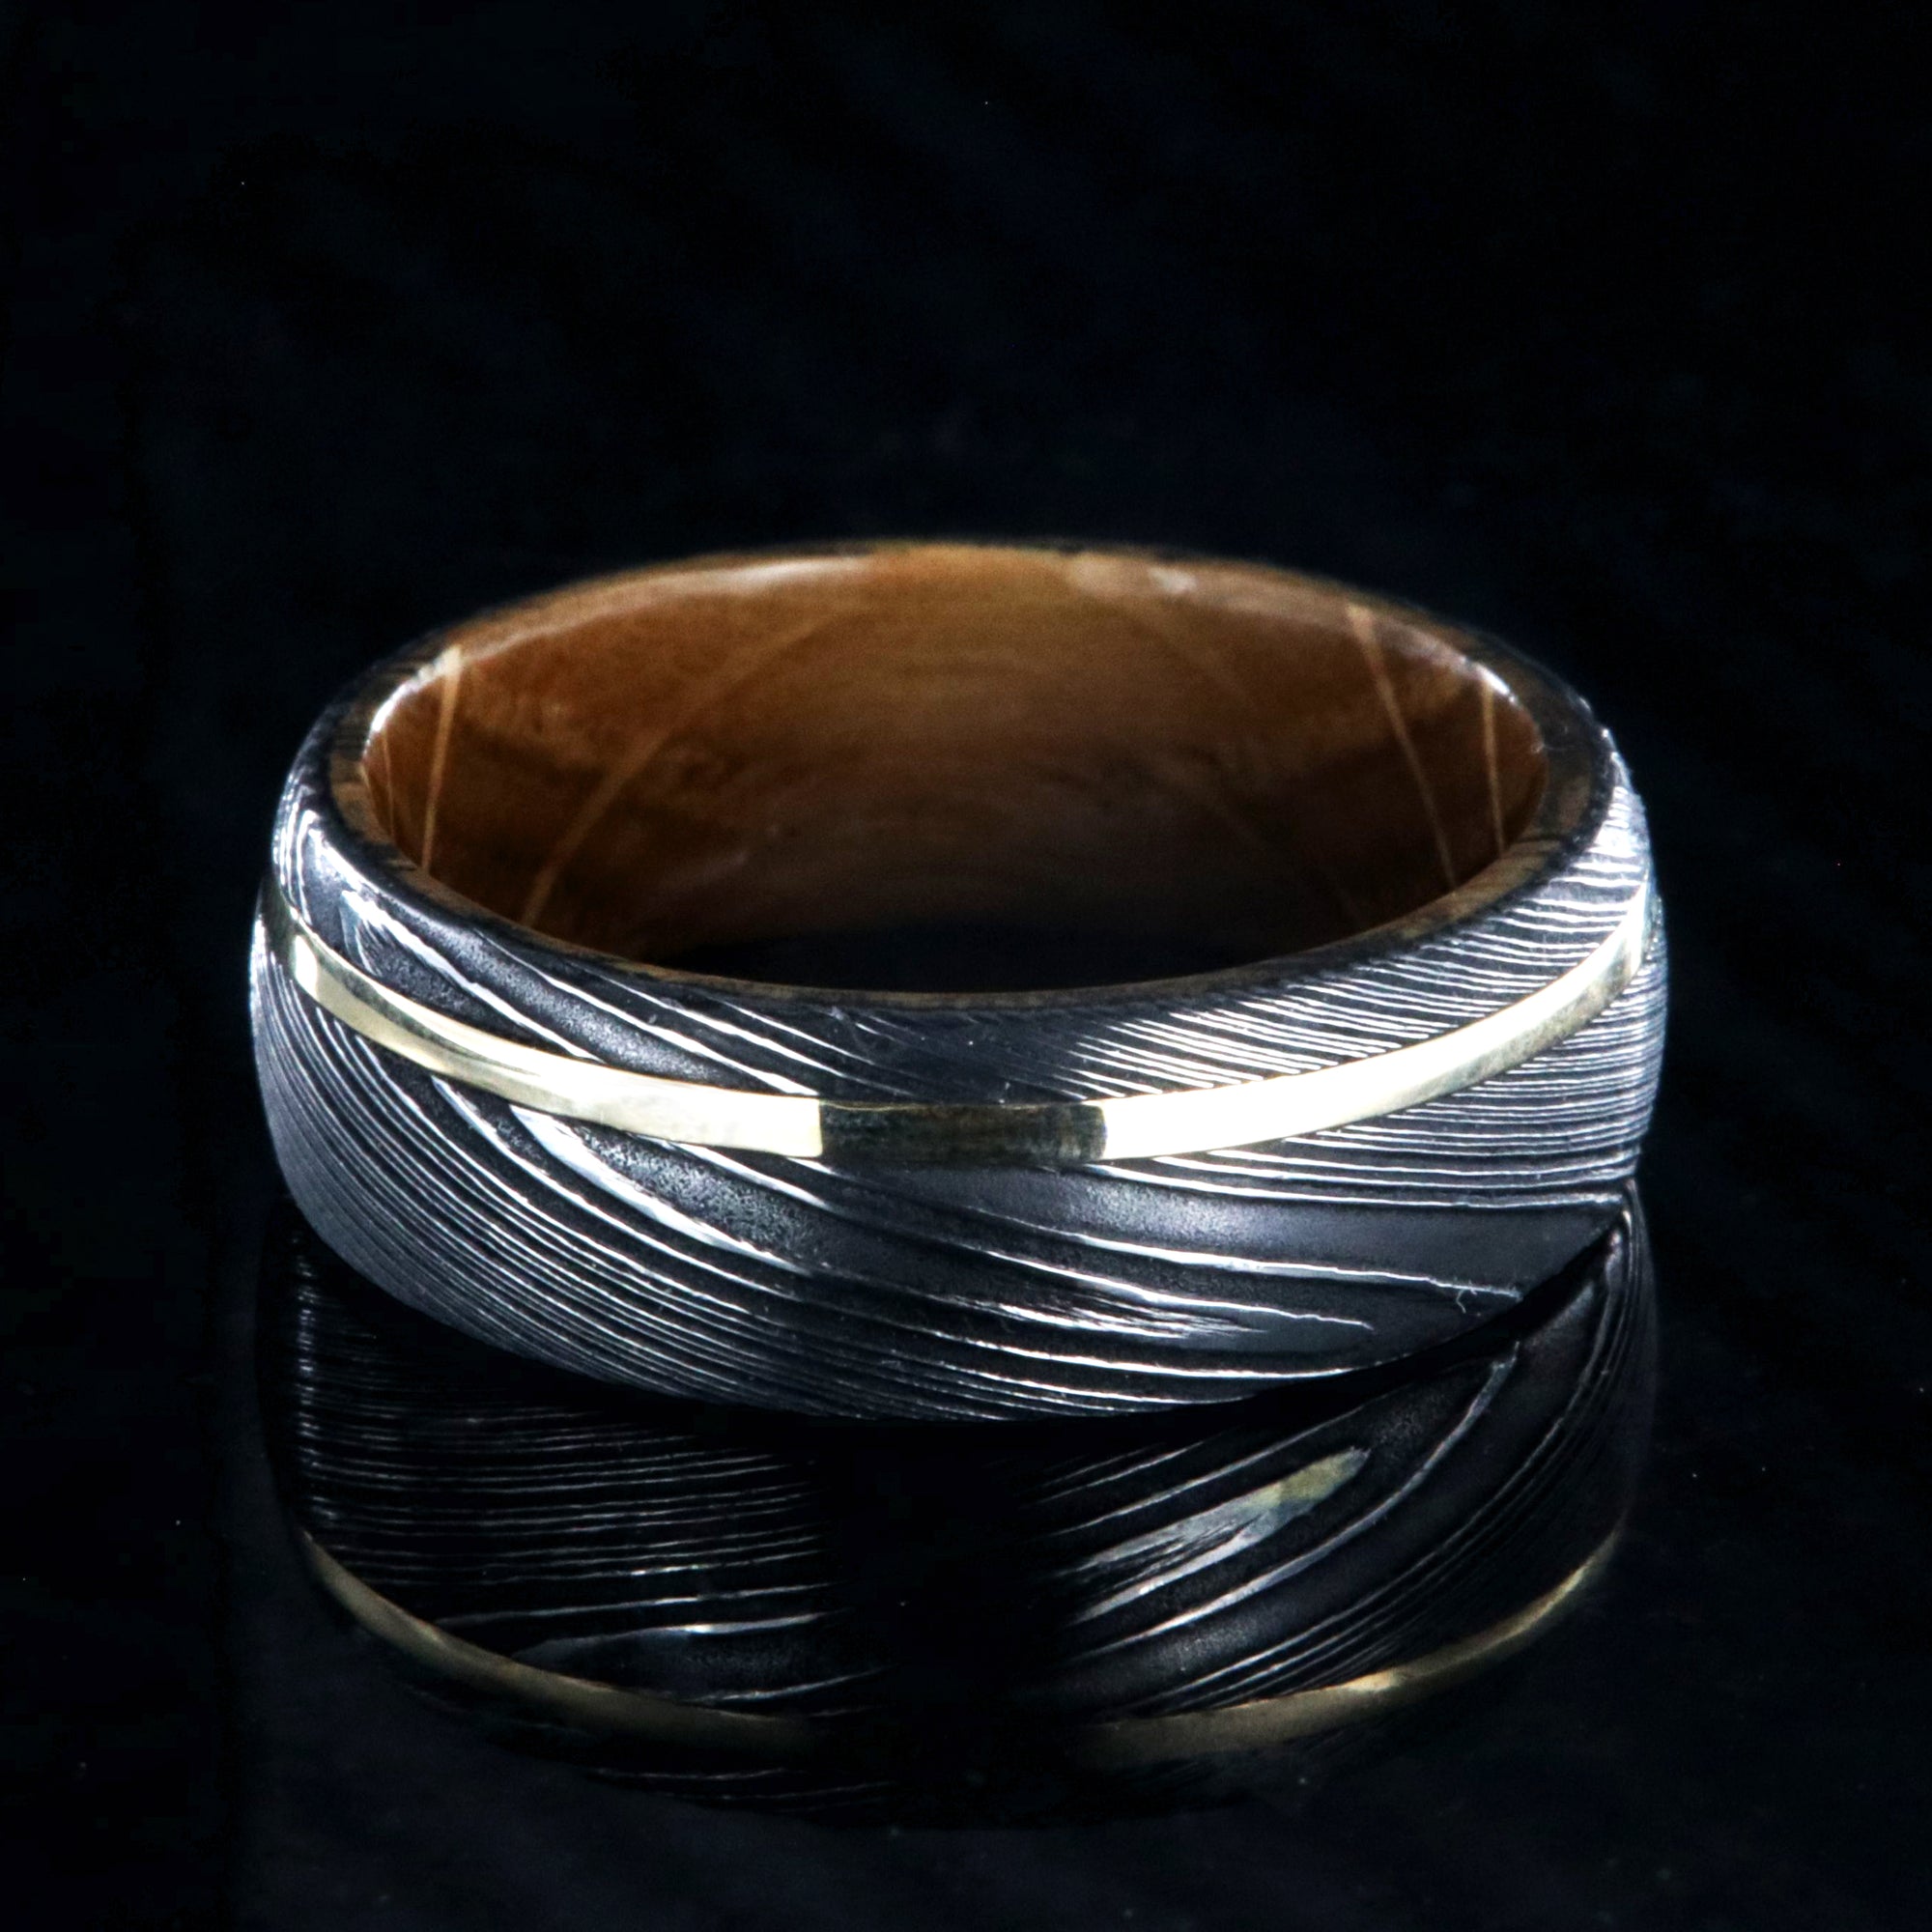 8mm wide Jack Daniel's whiskey barrel sleeve wedding ring set in black Damascus steel with a thin off-centered gold inlay